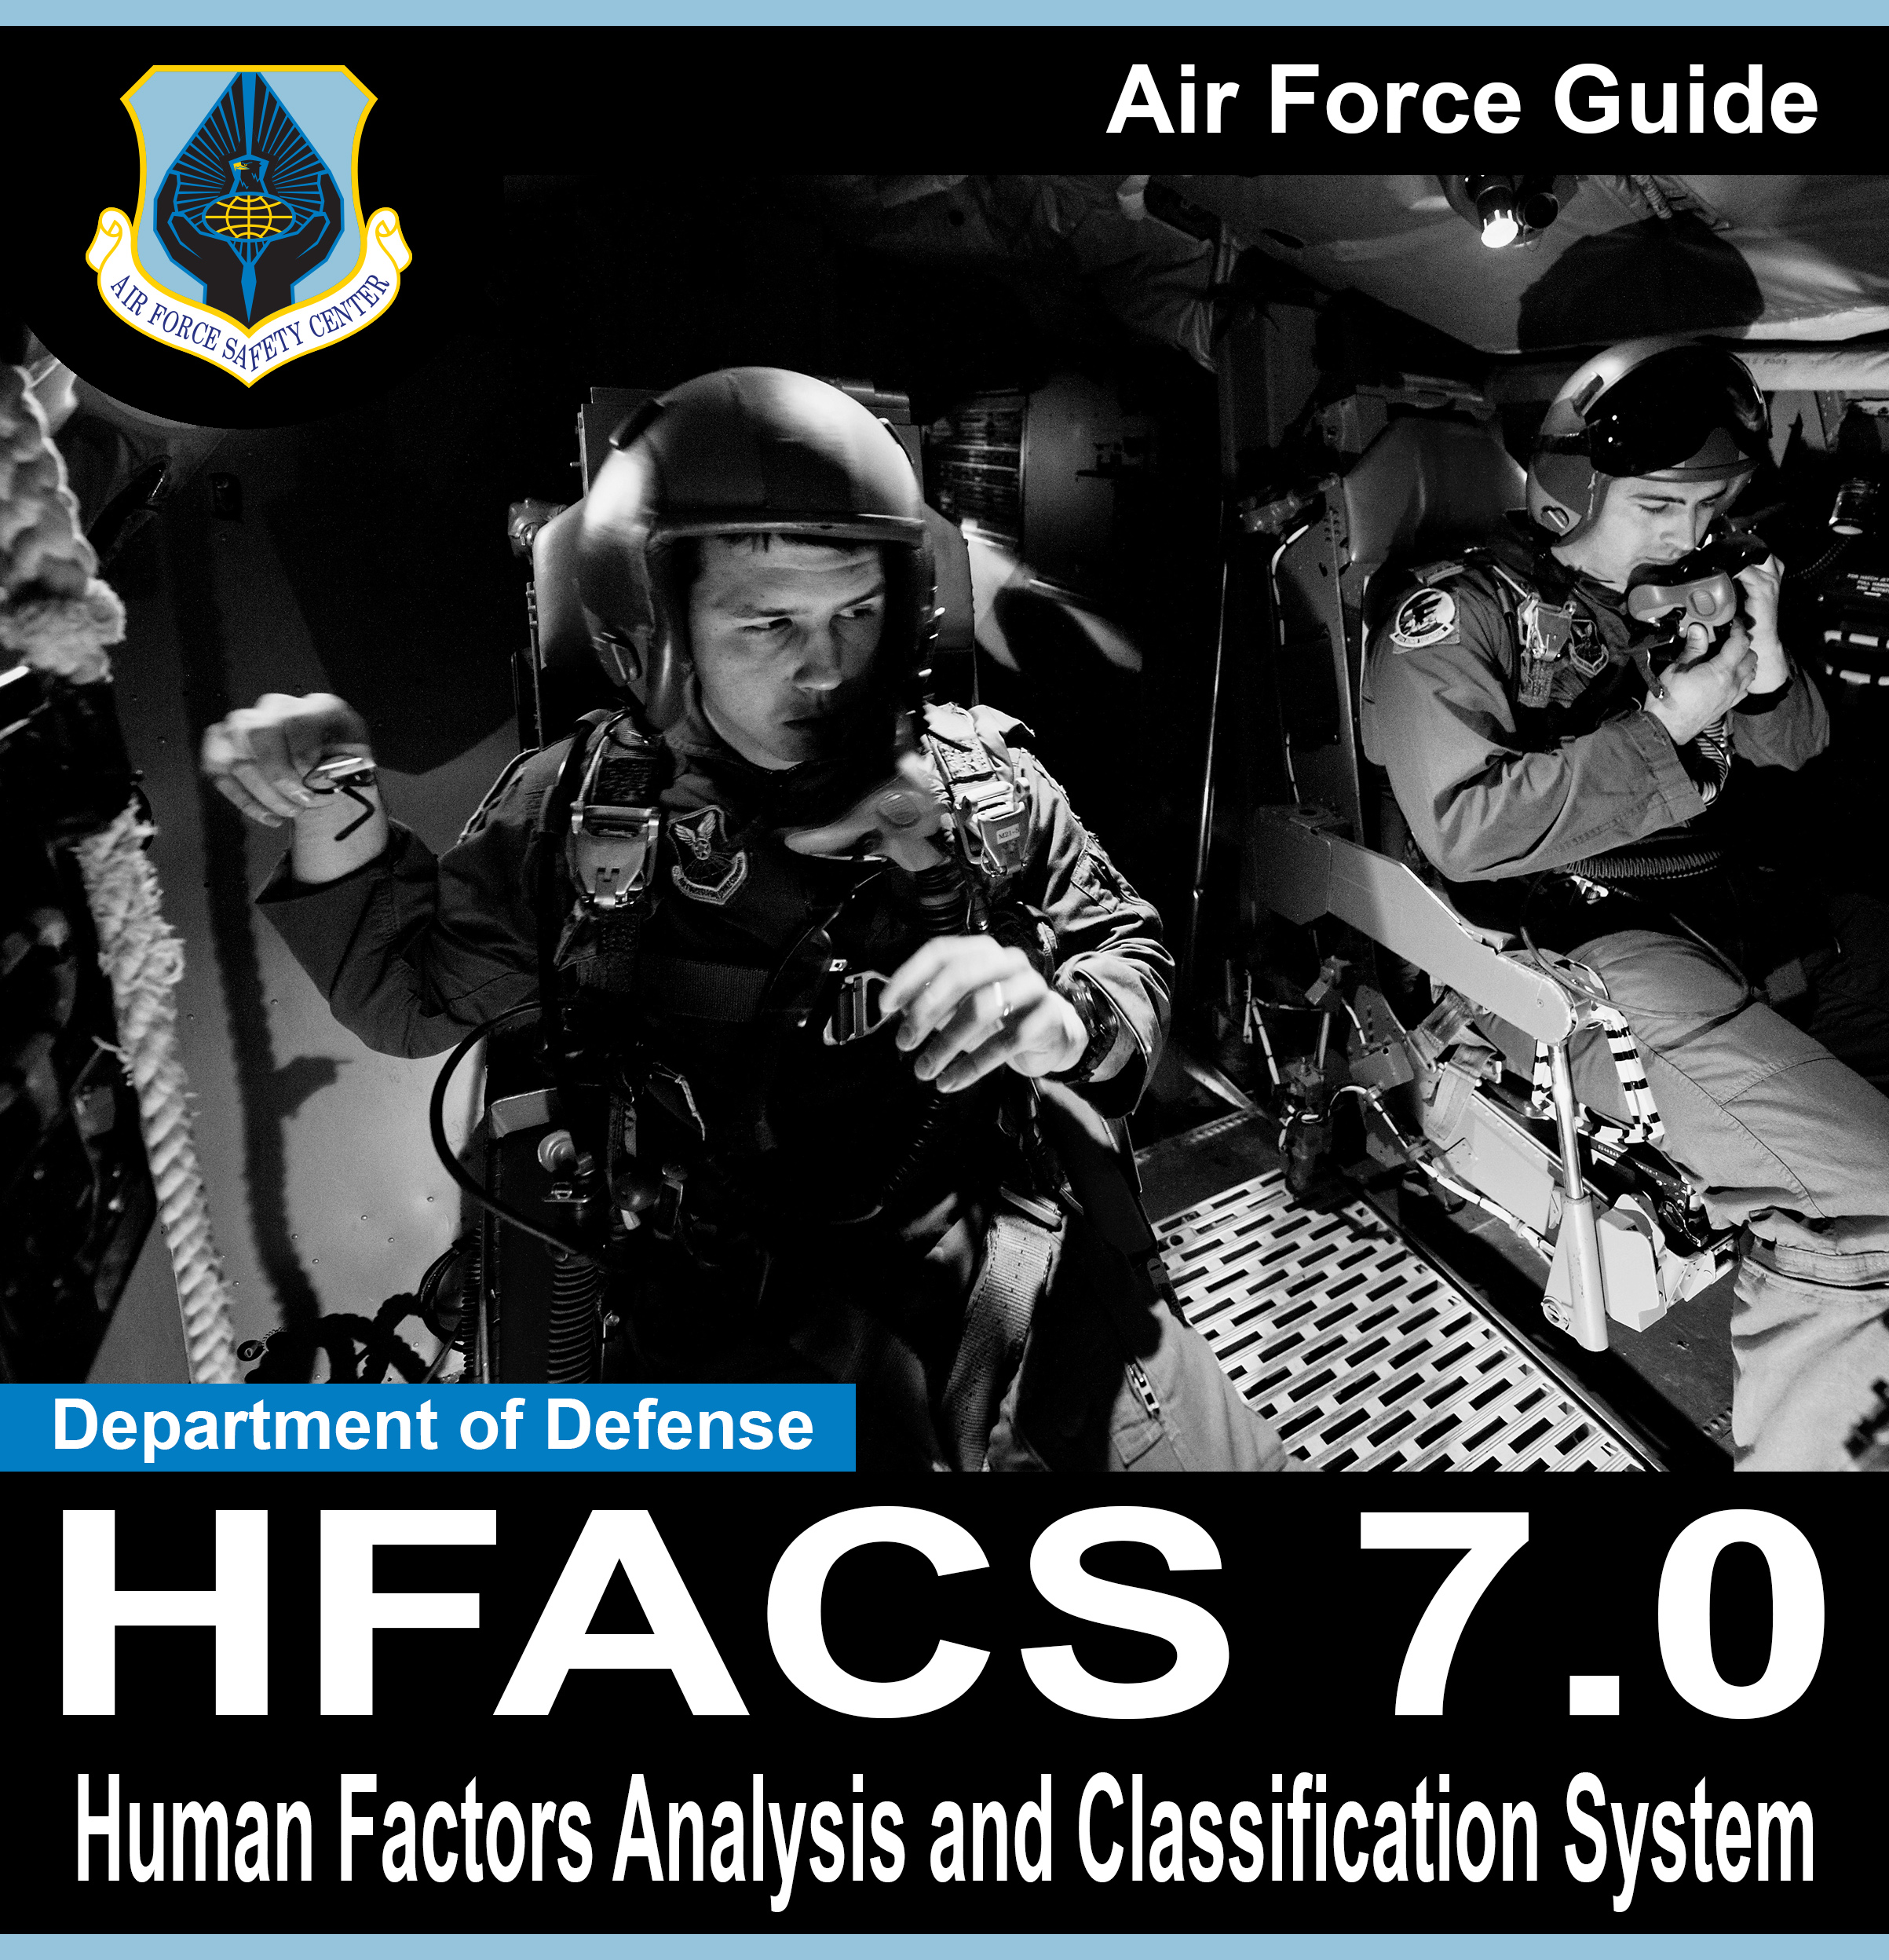 Click here to access Human Factors Analysis and Classifications System information